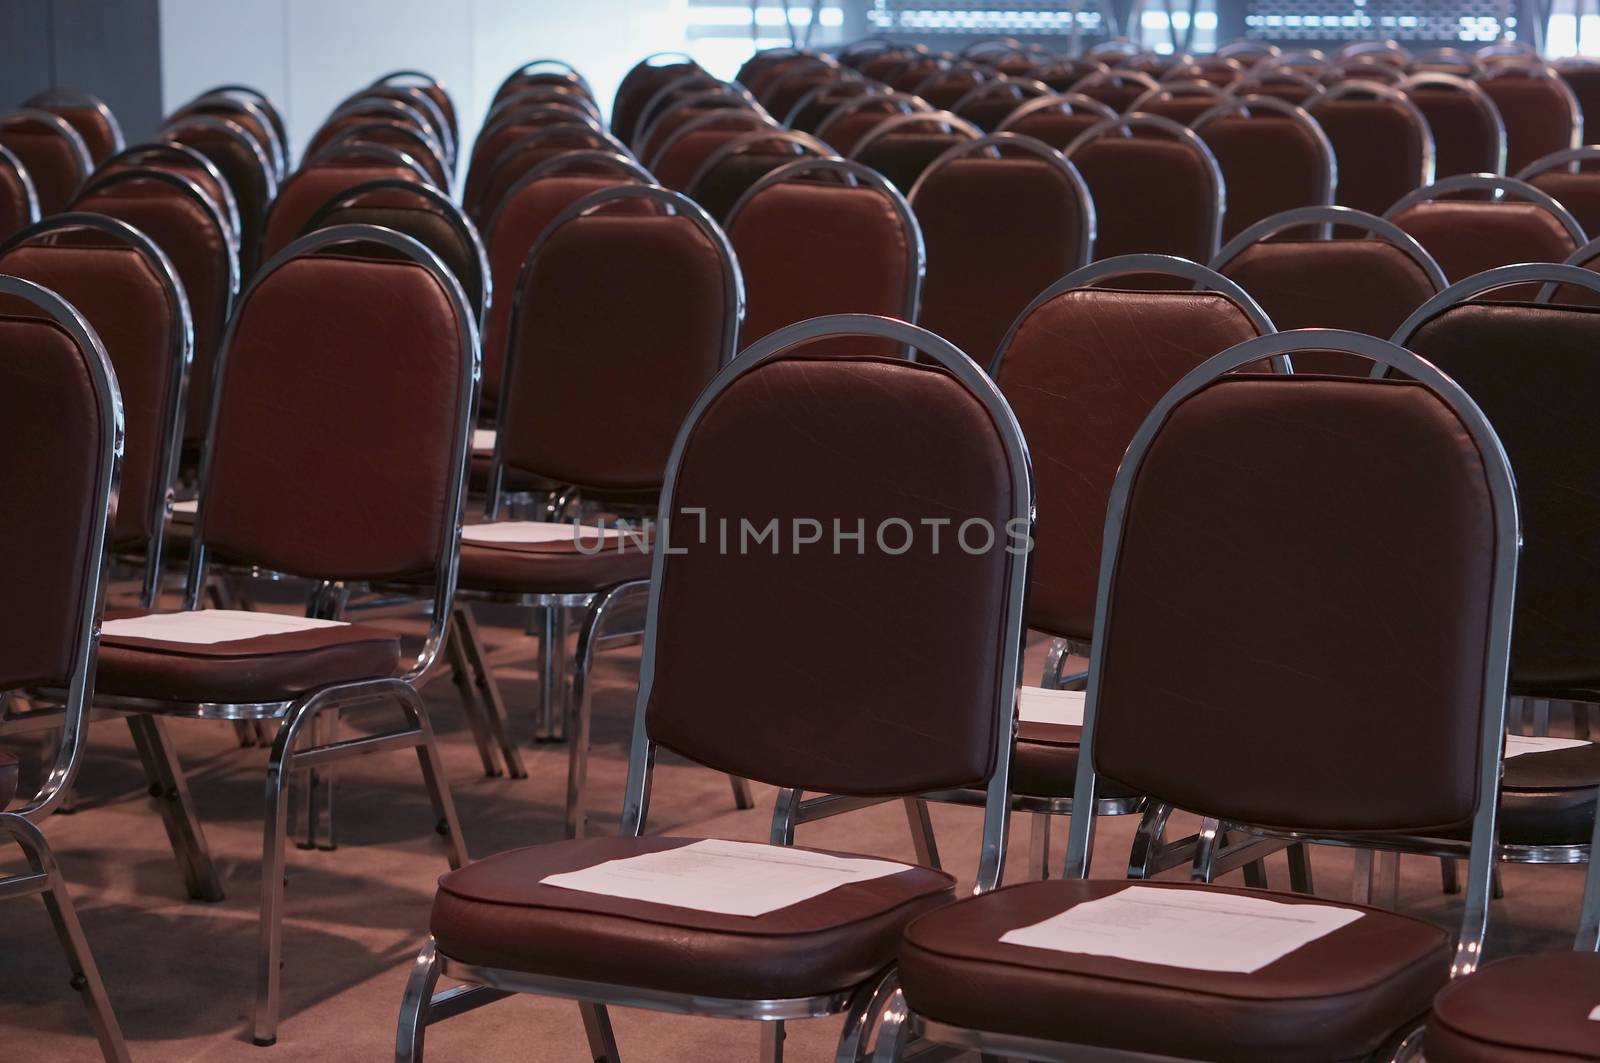 Empty classroom contained with brown chairs and document on top.